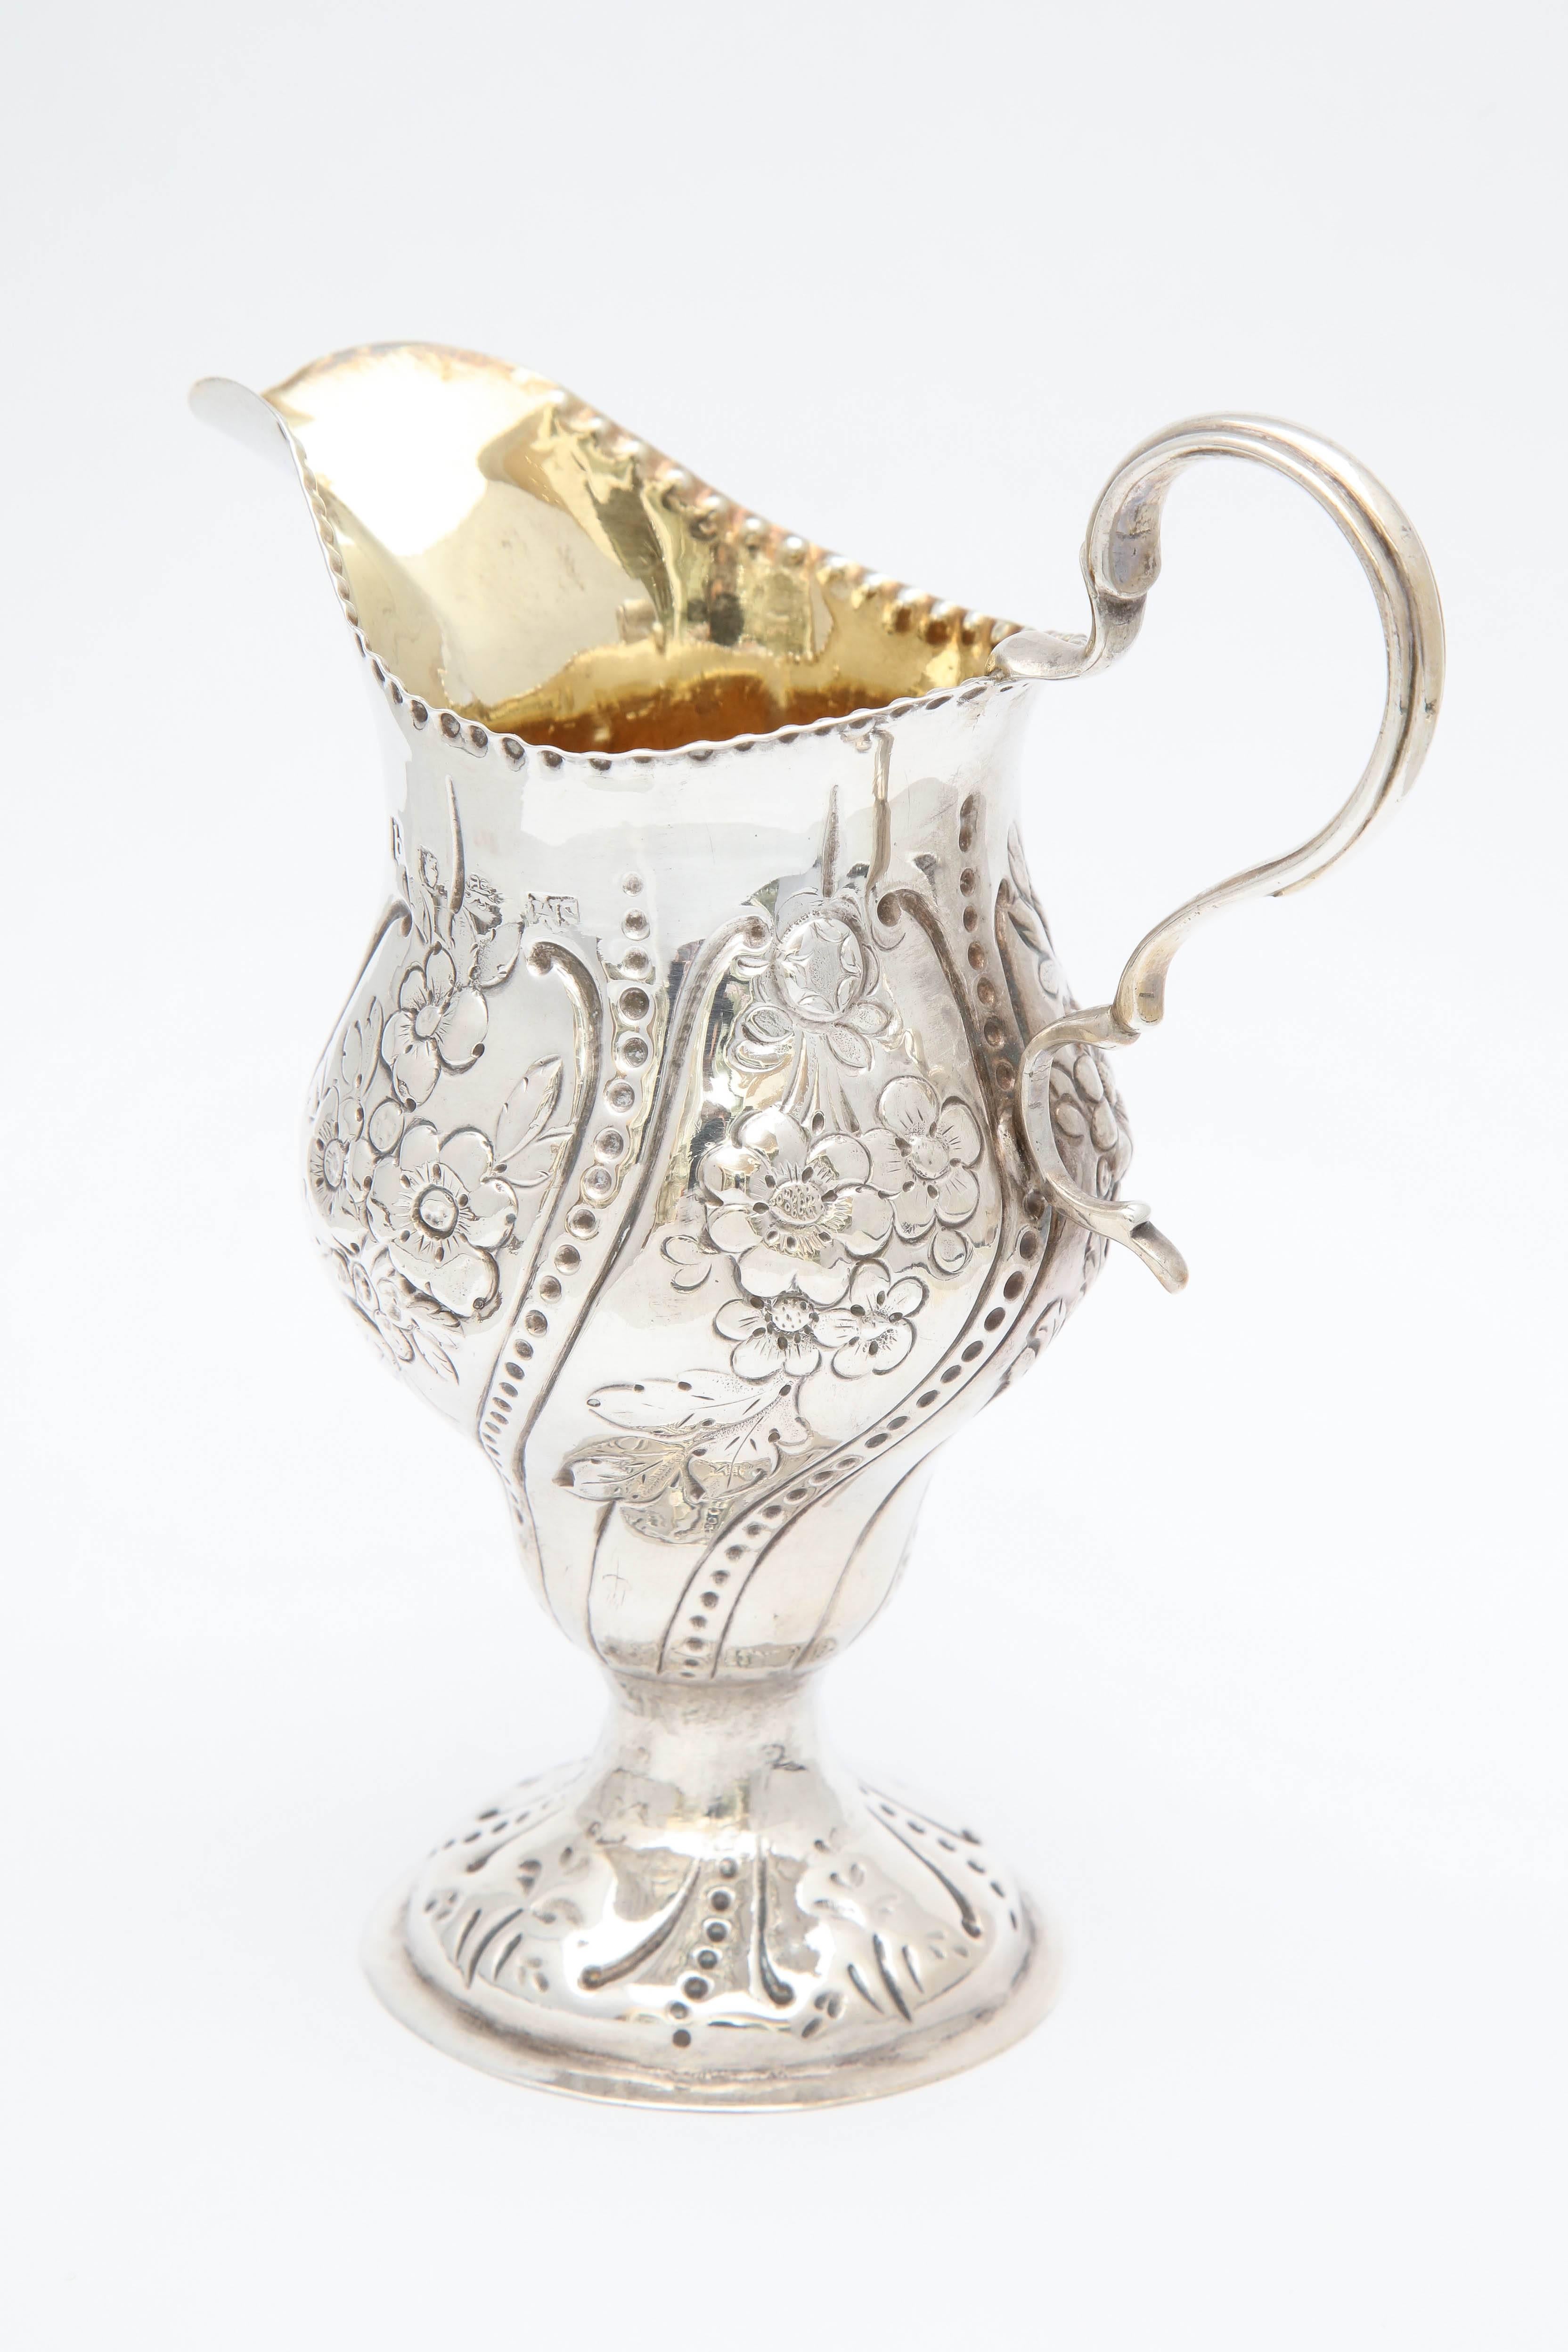 Late 18th Century George III Sterling Silver Cream Jug or Pitcher